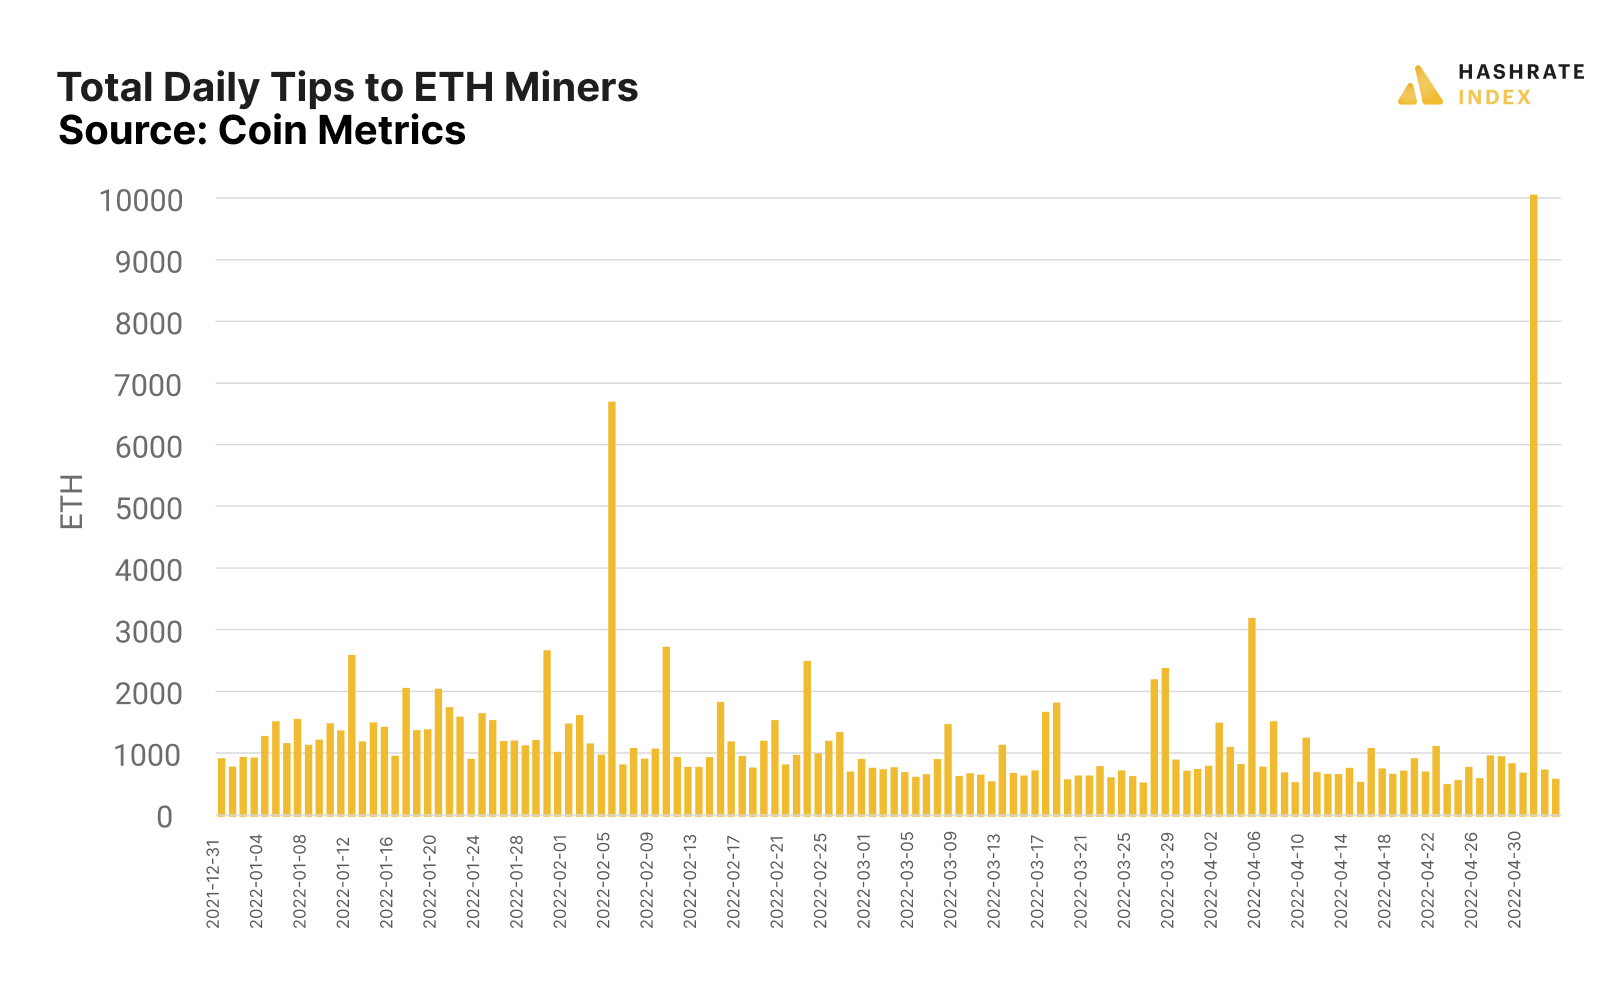 On May 1, 2022 Ethereum miners earned a record 10,029 ETH in transaction tips | Source: CoinMetrics